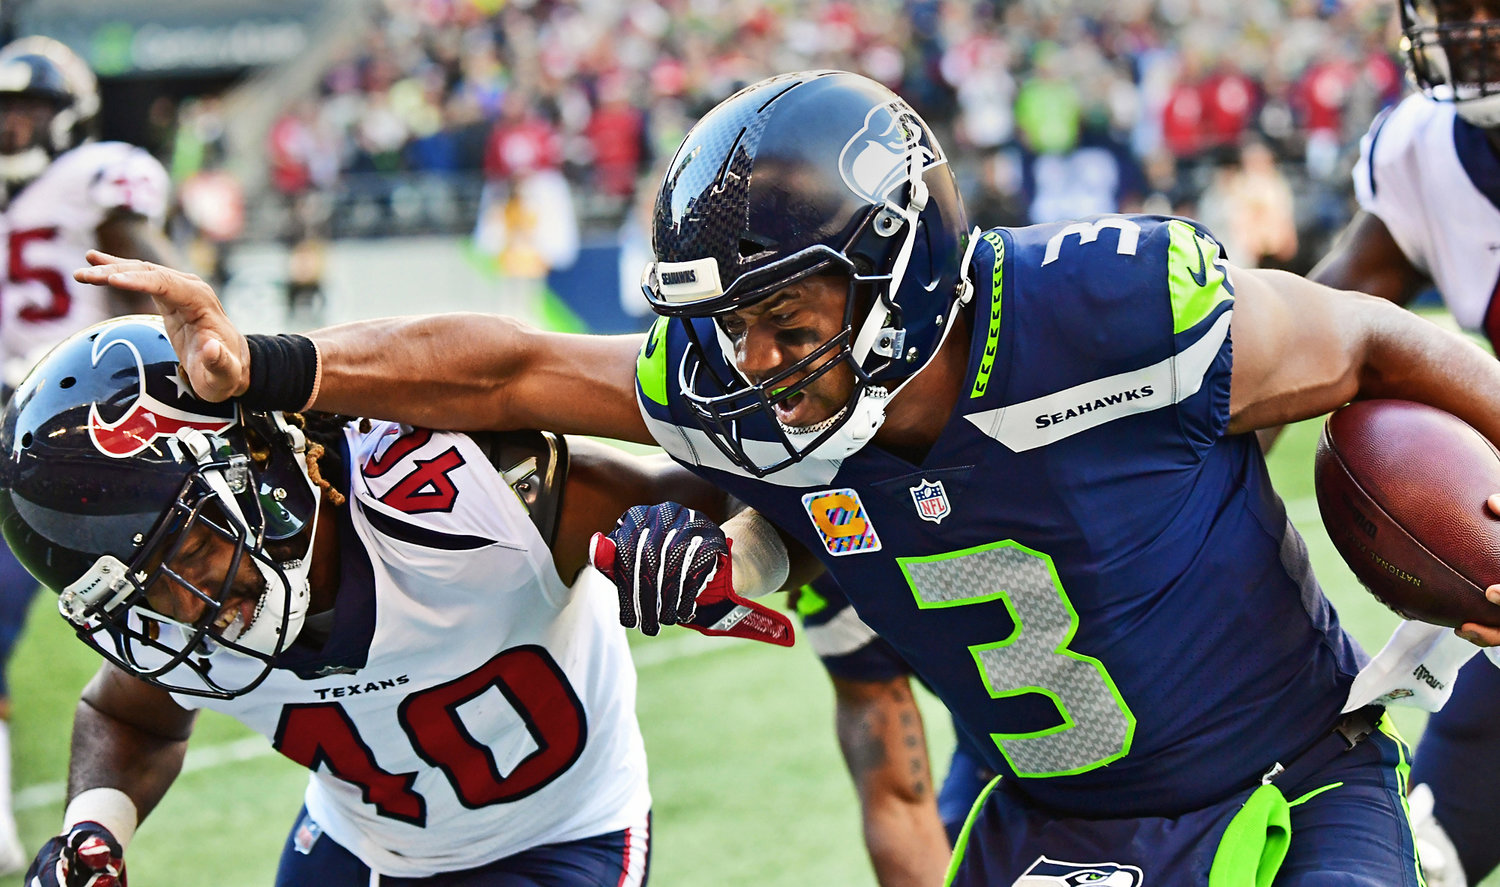 Seattle Seahawks quarterback Russell Wilson scrambles for good yardage before stiff-arming Houston Texans cornerback Marcus Williams to end the play in this file photo.